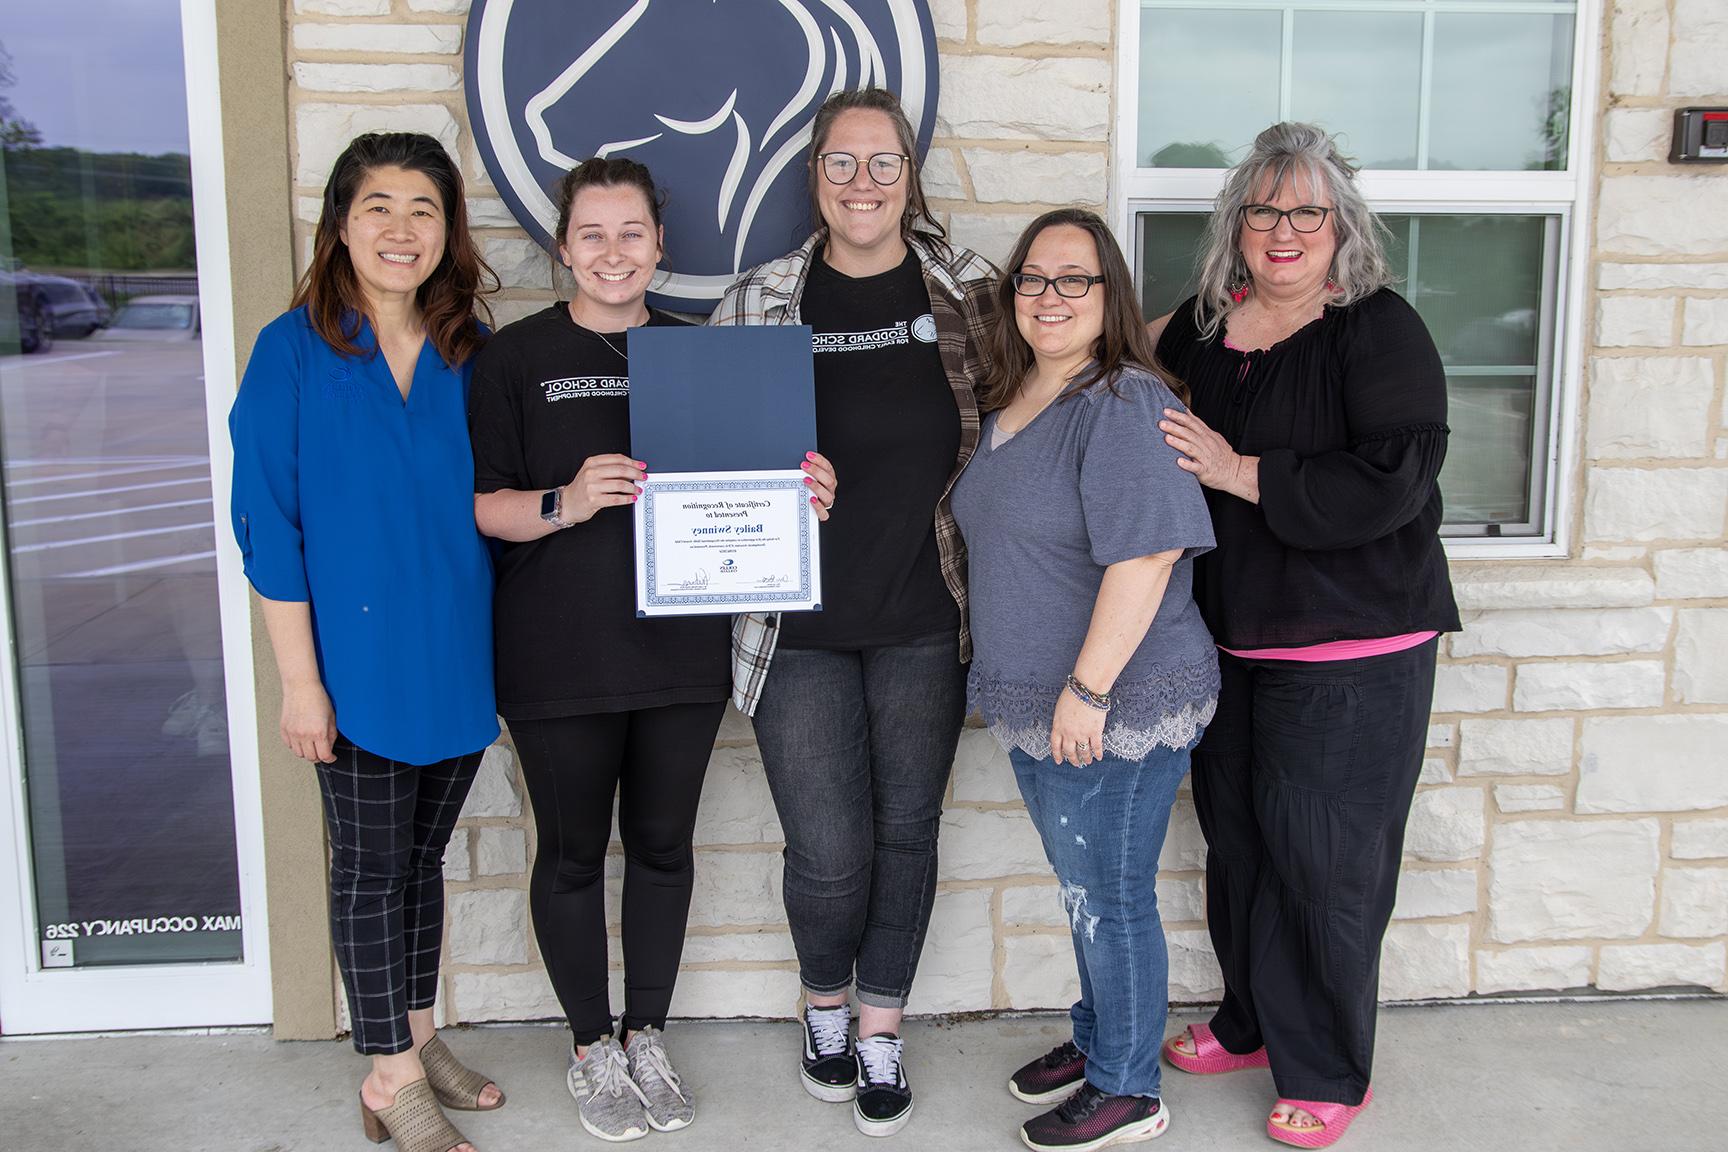 Pictured from left: Awards and Grants Coordinator Angelia Turquette, Apprenticeship and Employer Engagement Manager Jewel Coates, Mentor Morgan Winnubst, Apprentice Bailey Swinney, and Early Childhood Educator Lead Ann Butler